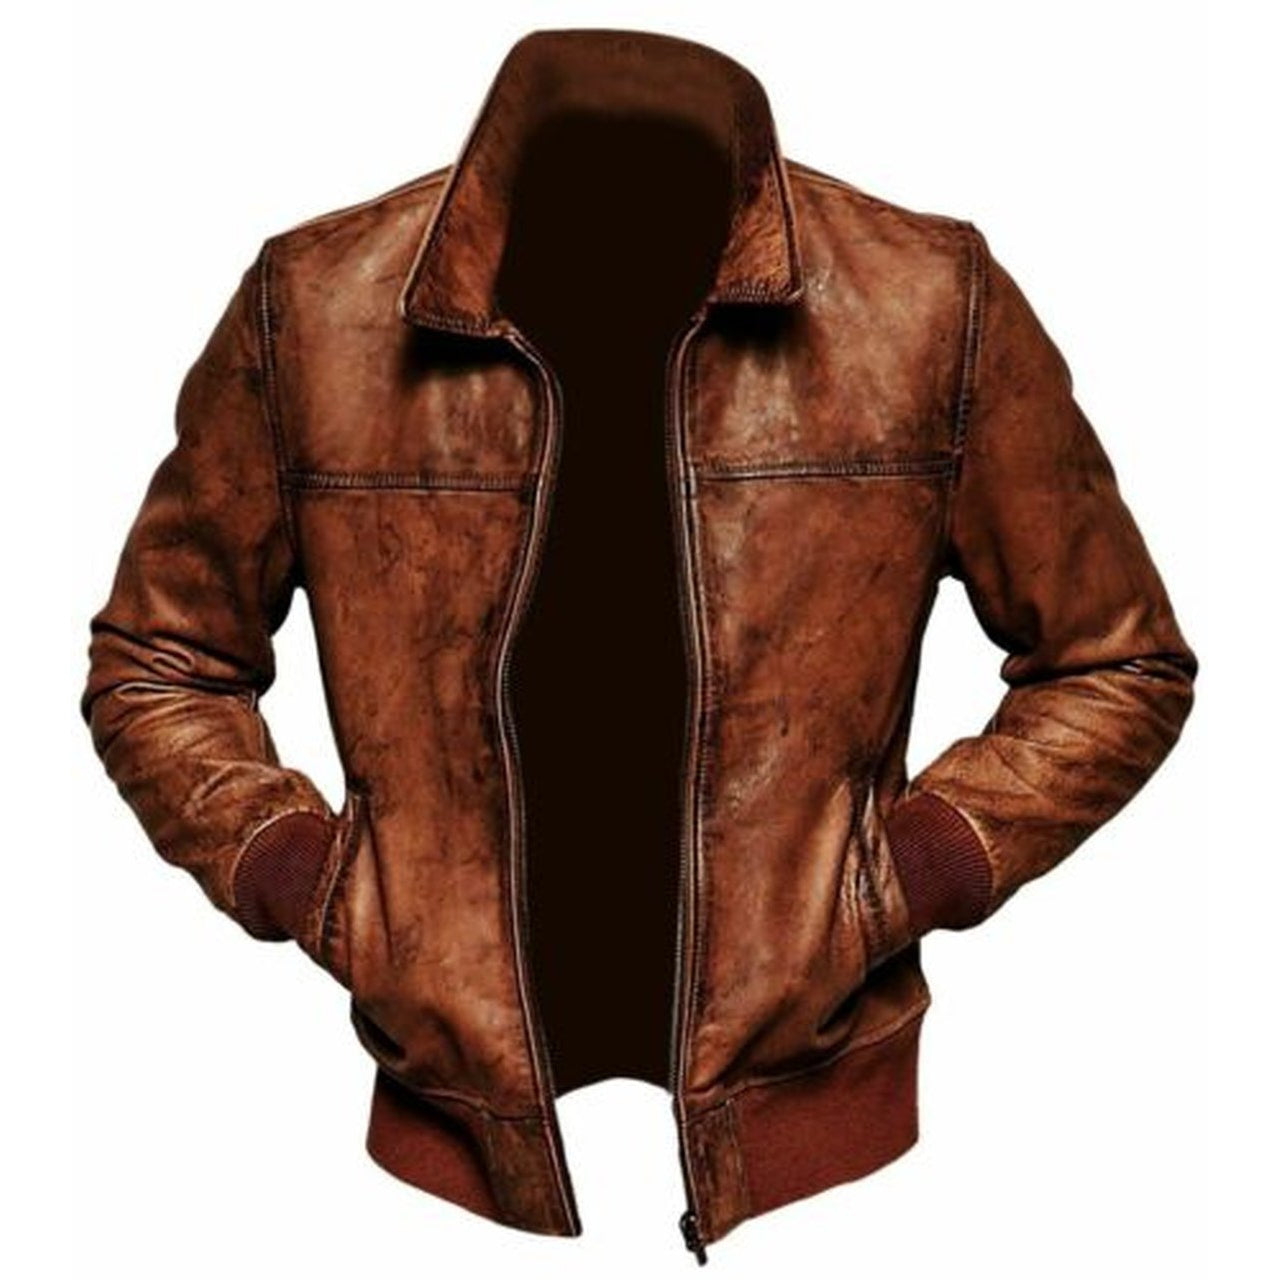 Why Is Distressed Brown Leather So Trendy? – HIDES